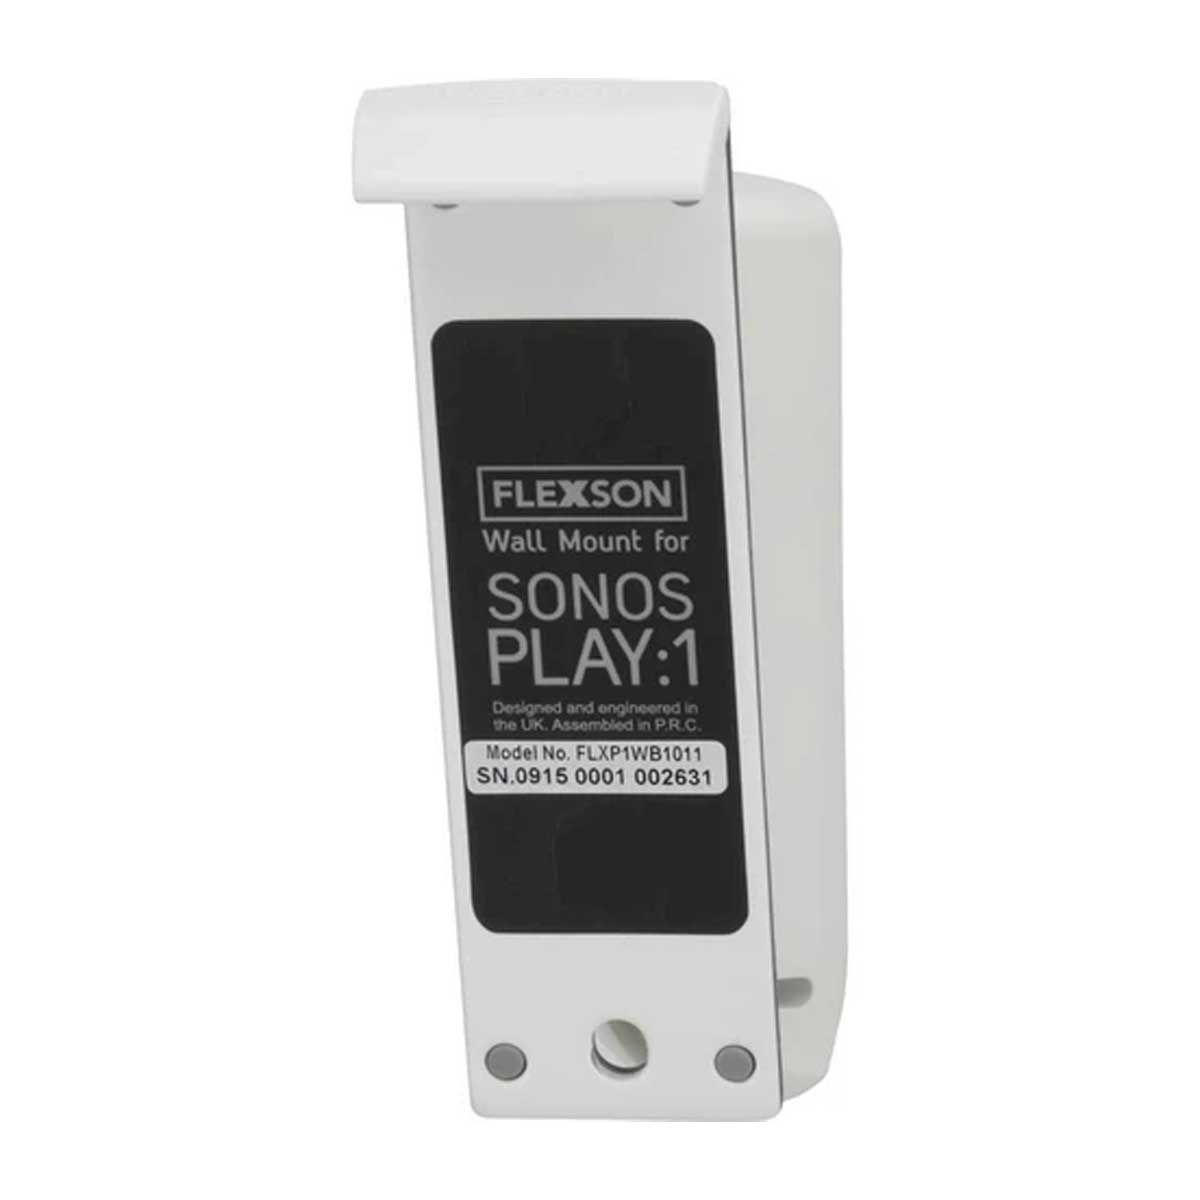 FLEXSON WALL MOUNT FOR SONOS PLAY:1 WITH INSTALLATION HARDWARE (PAIR, WHITE)